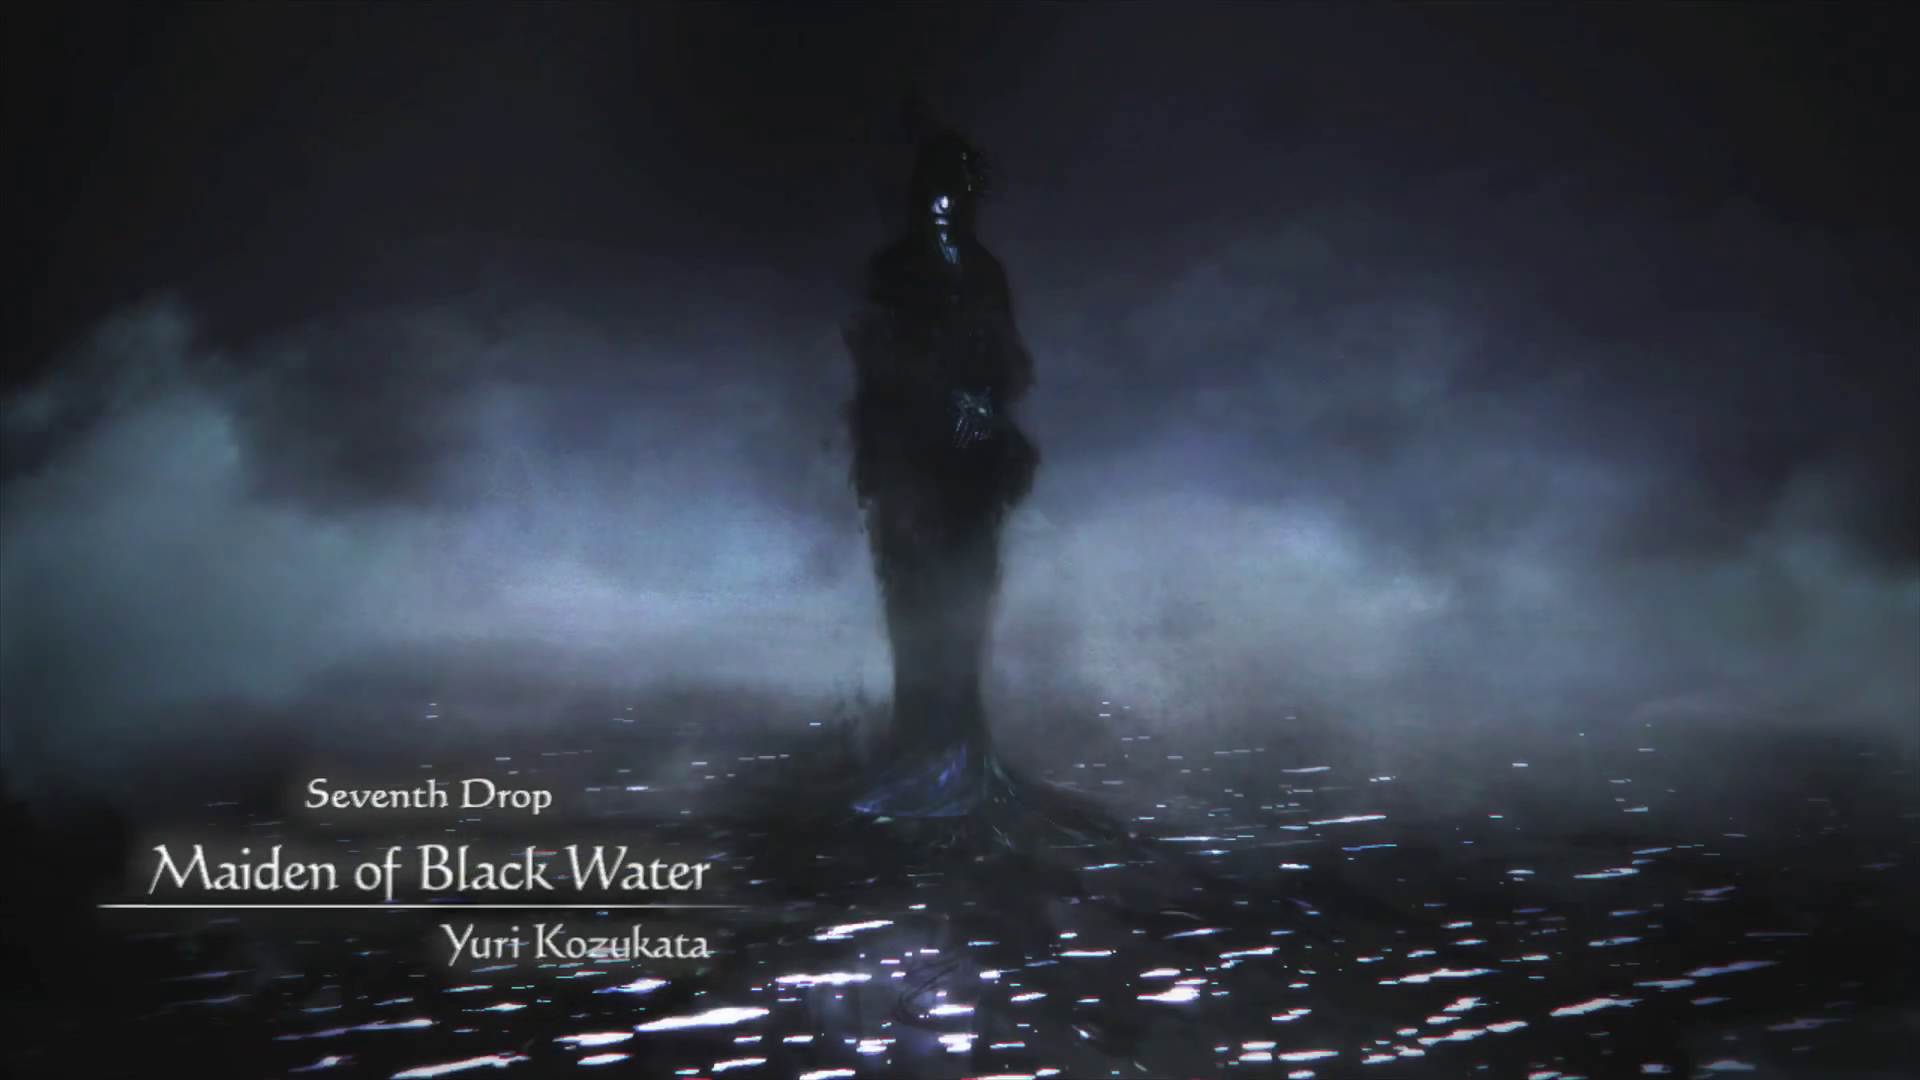 FATAL FRAME / PROJECT ZERO: Maiden of Black Water Story Guide - All Drops Detailed Info - 𝕊𝕖𝕧𝕖𝕟𝕥𝕙 𝔻𝕣𝕠𝕡 - 𝕄𝕒𝕚𝕕𝕖𝕟 𝕠𝕗 𝔹𝕝𝕒𝕔𝕜 𝕎𝕒𝕥𝕖𝕣 - 1B1C0ED